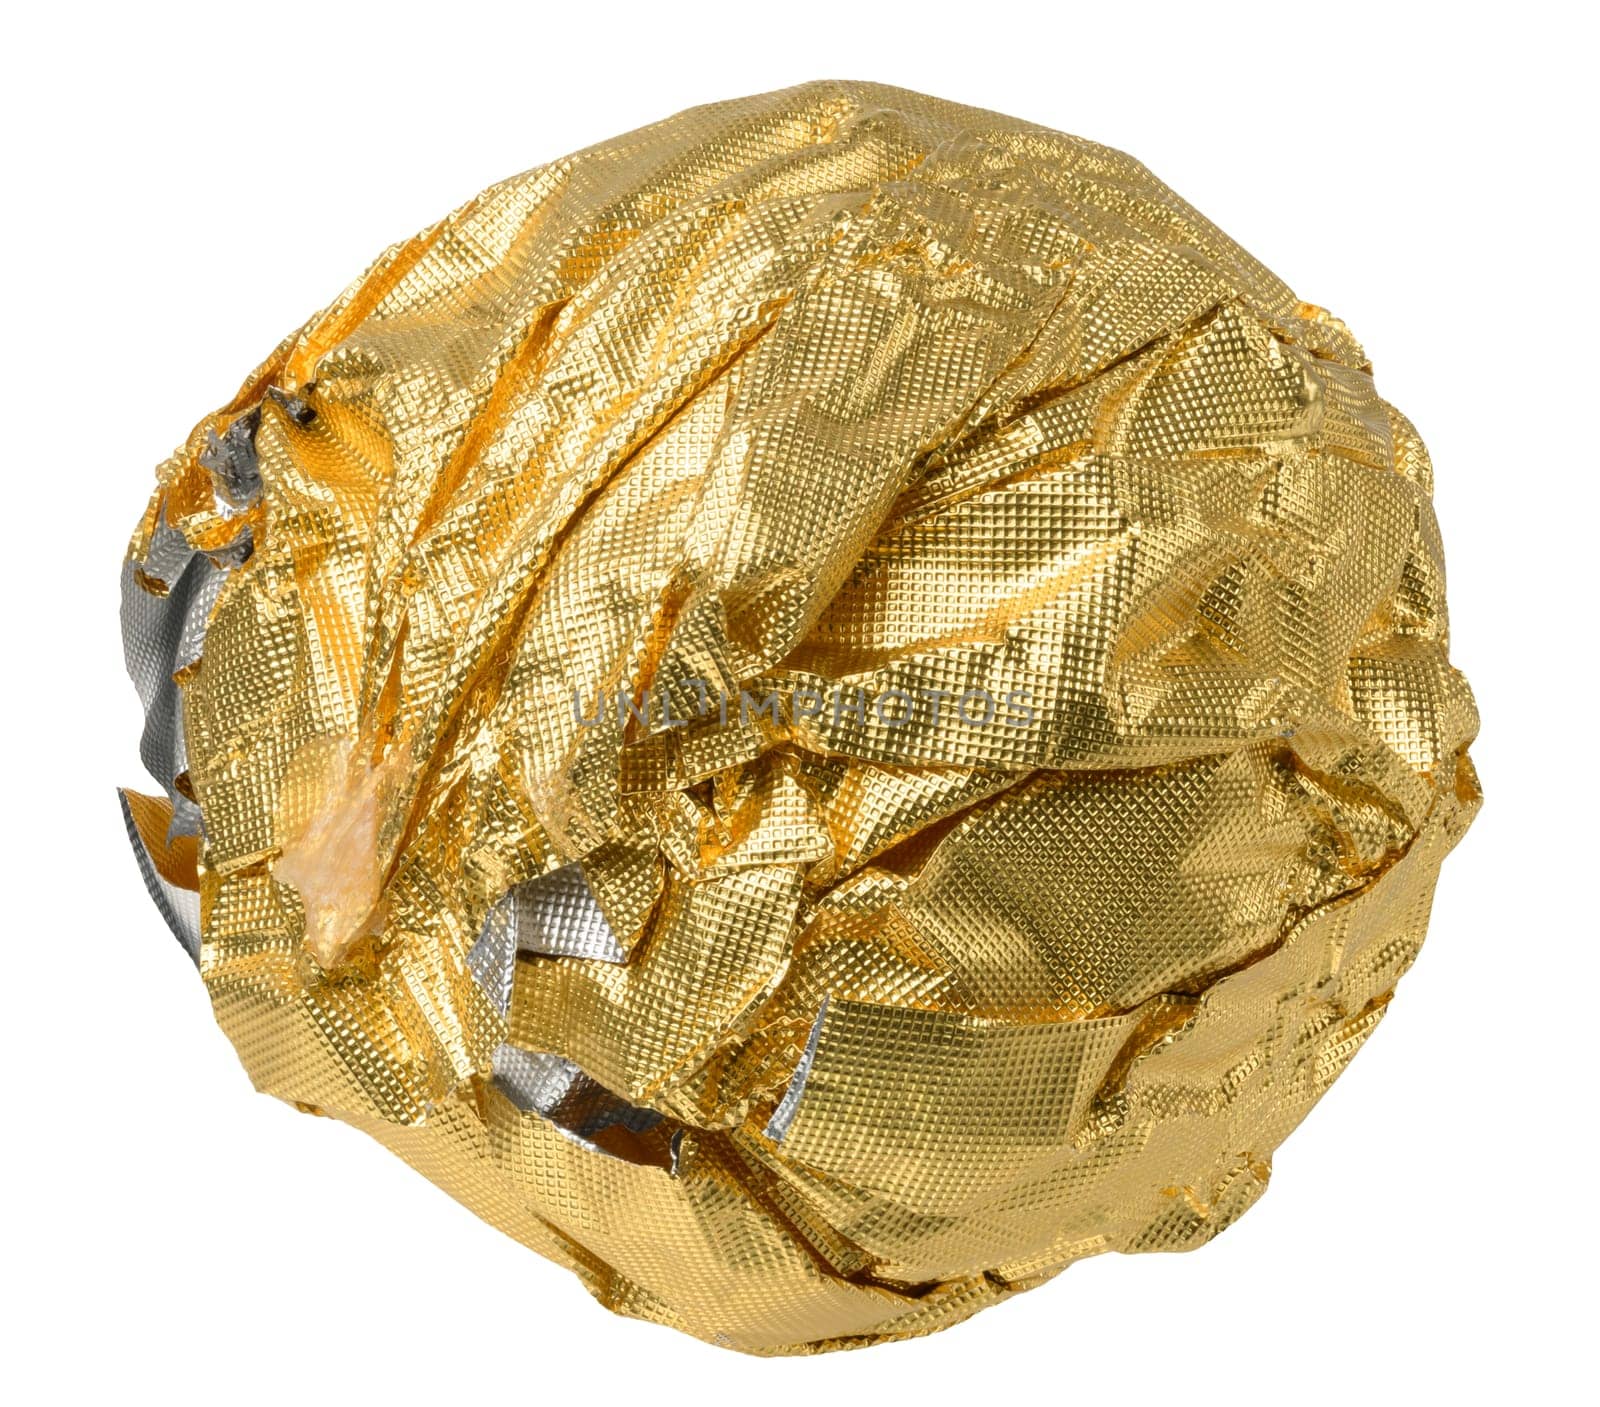 Ball of crumpled golden foil on isolated background, close up